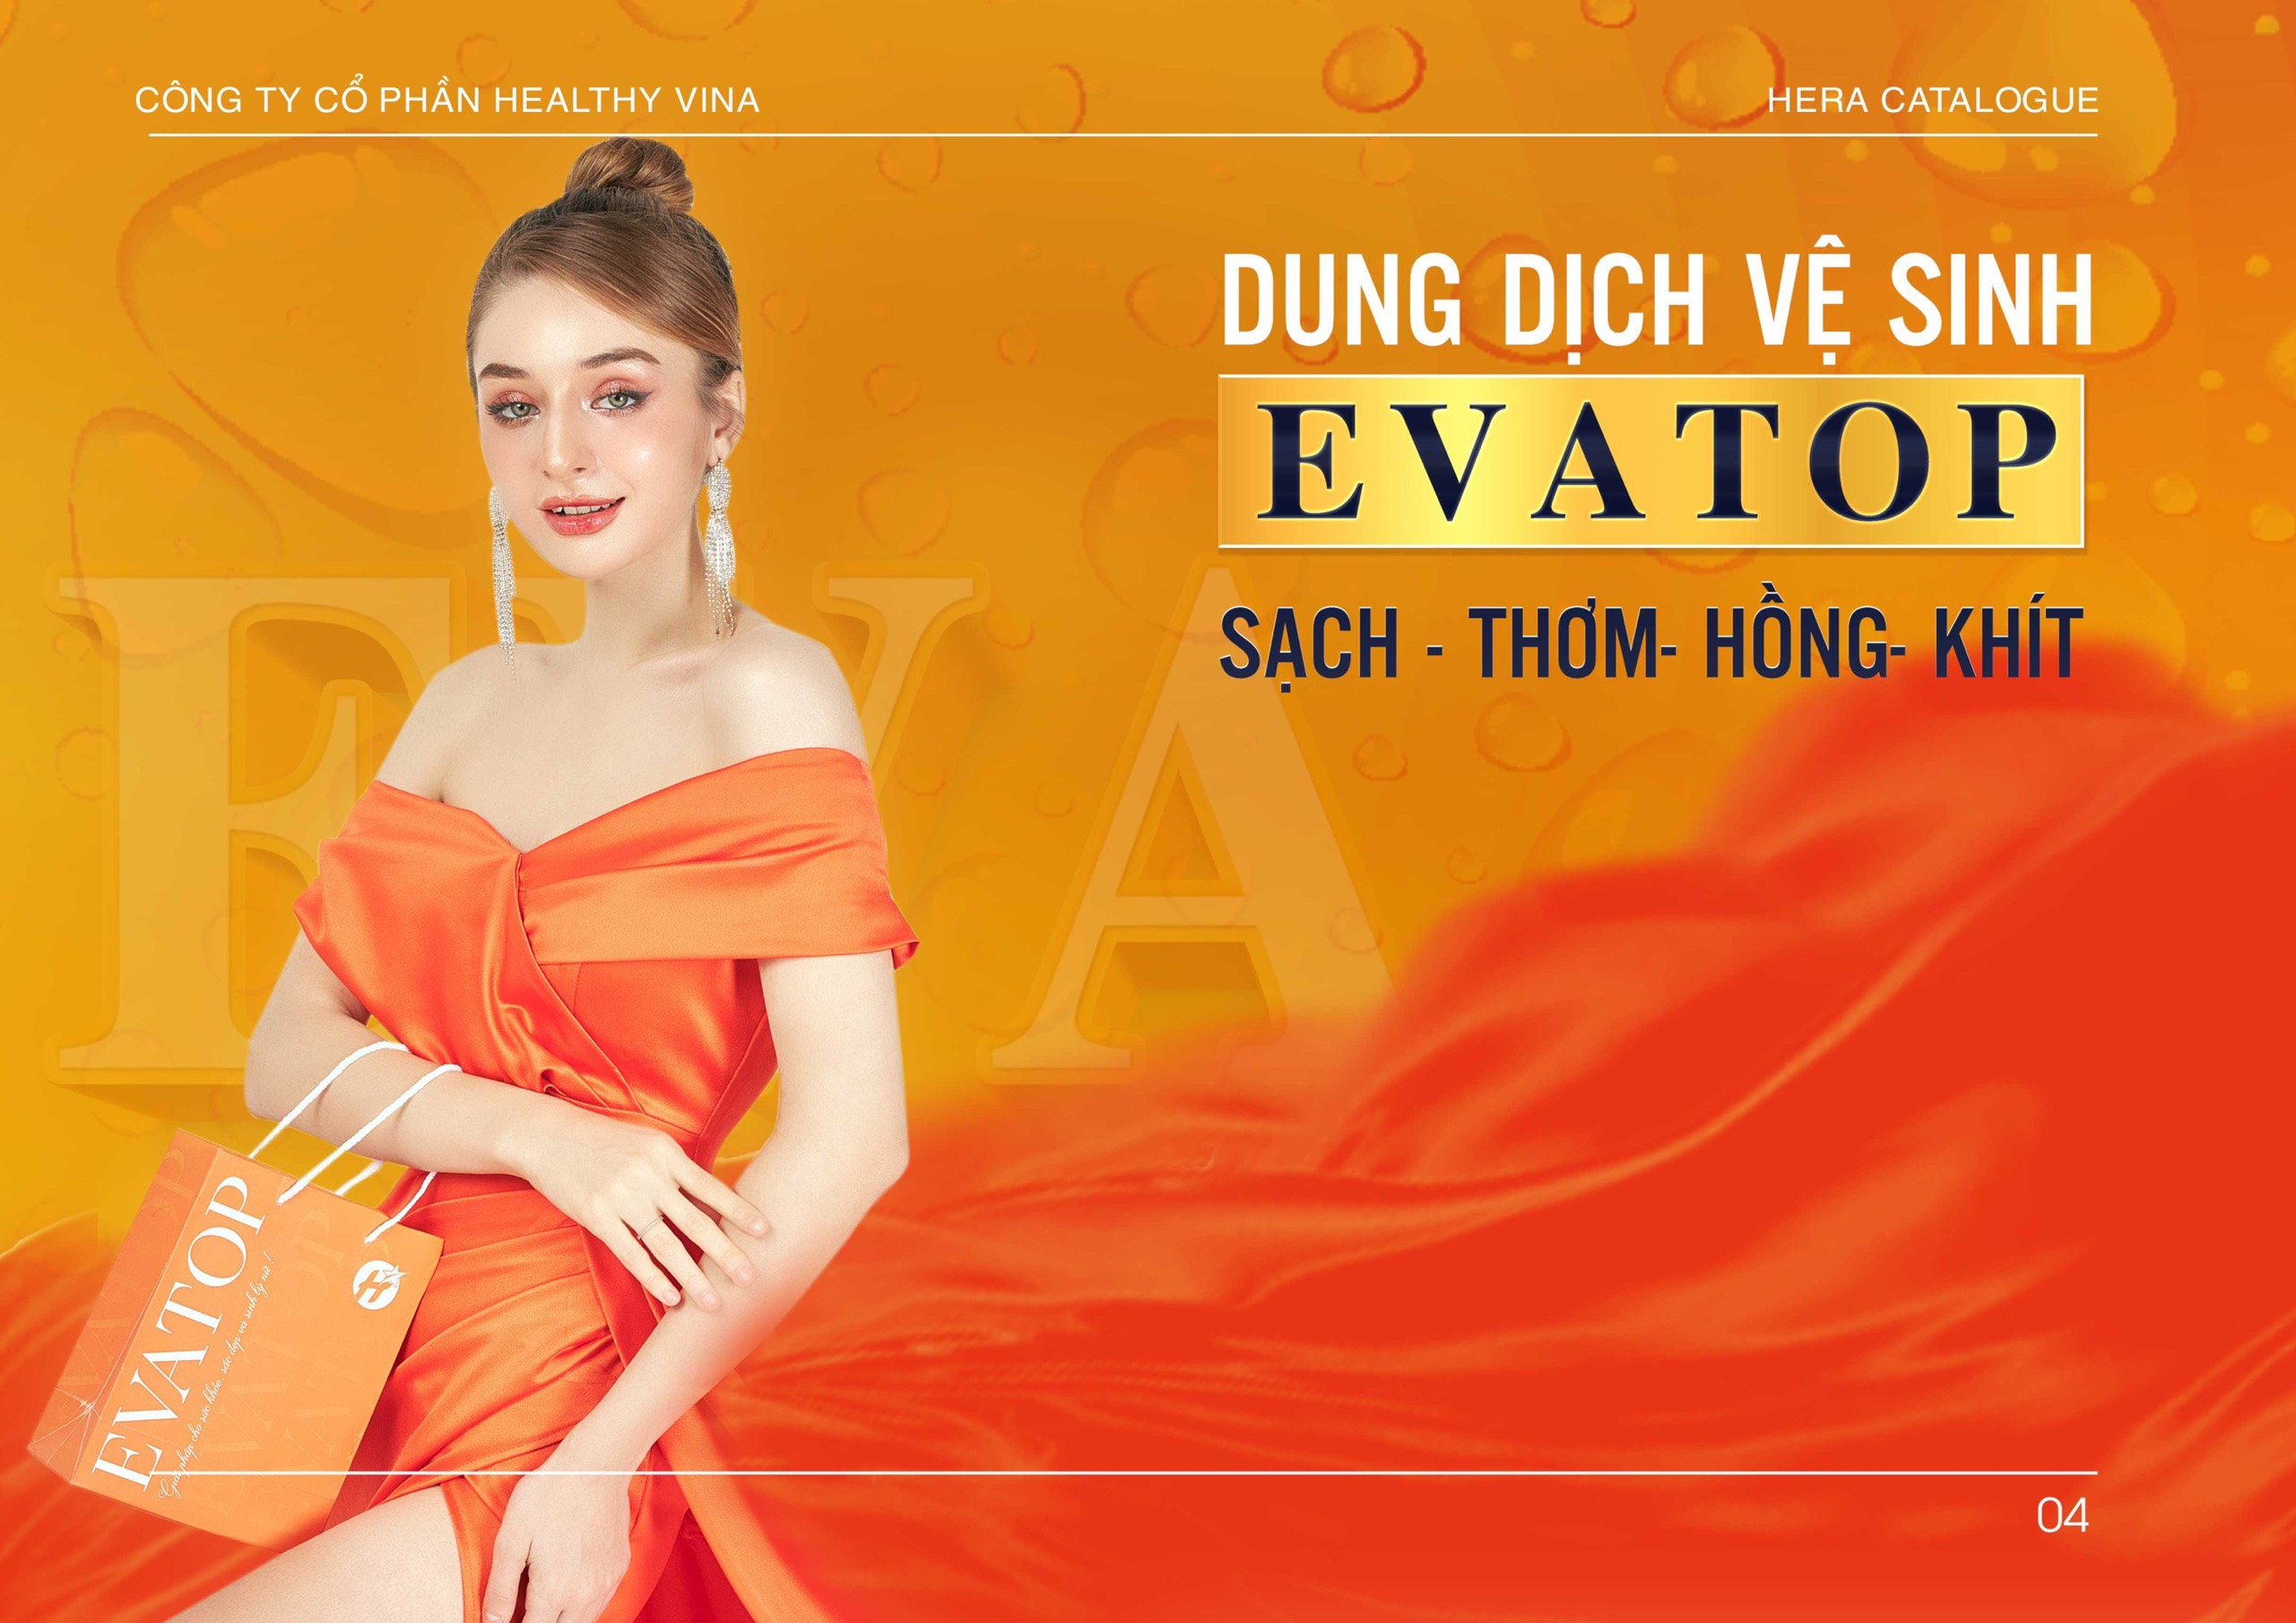 Dung dịch vệ sinh Evatop Hera